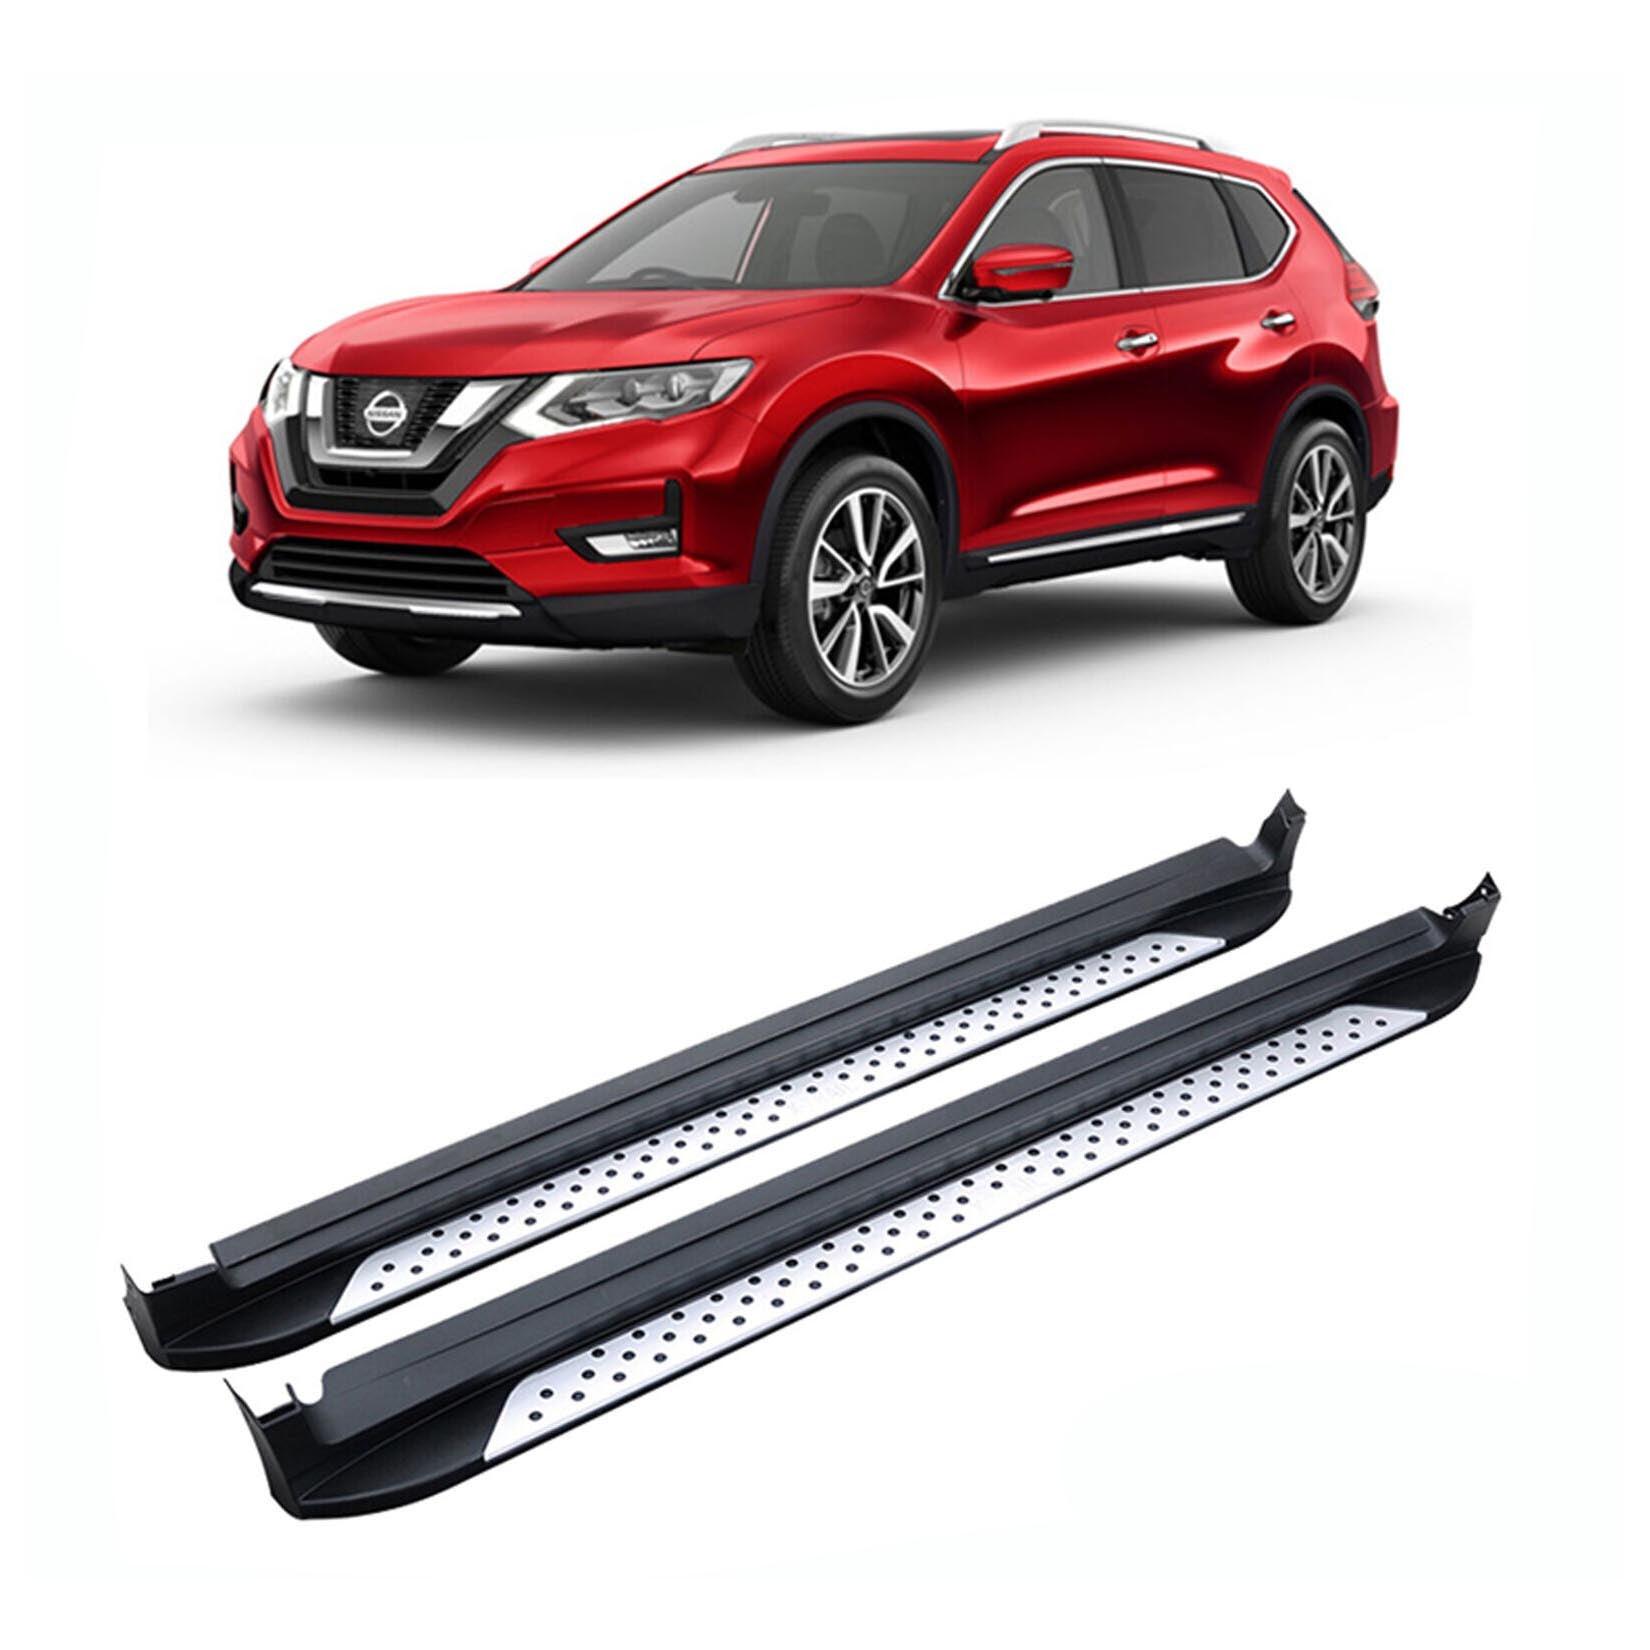 NISSAN X-TRAIL 2014 - 2020 - STX SIDE STEPS INTEGRATED RUNNING BOARDS - PAIR - Storm Xccessories2